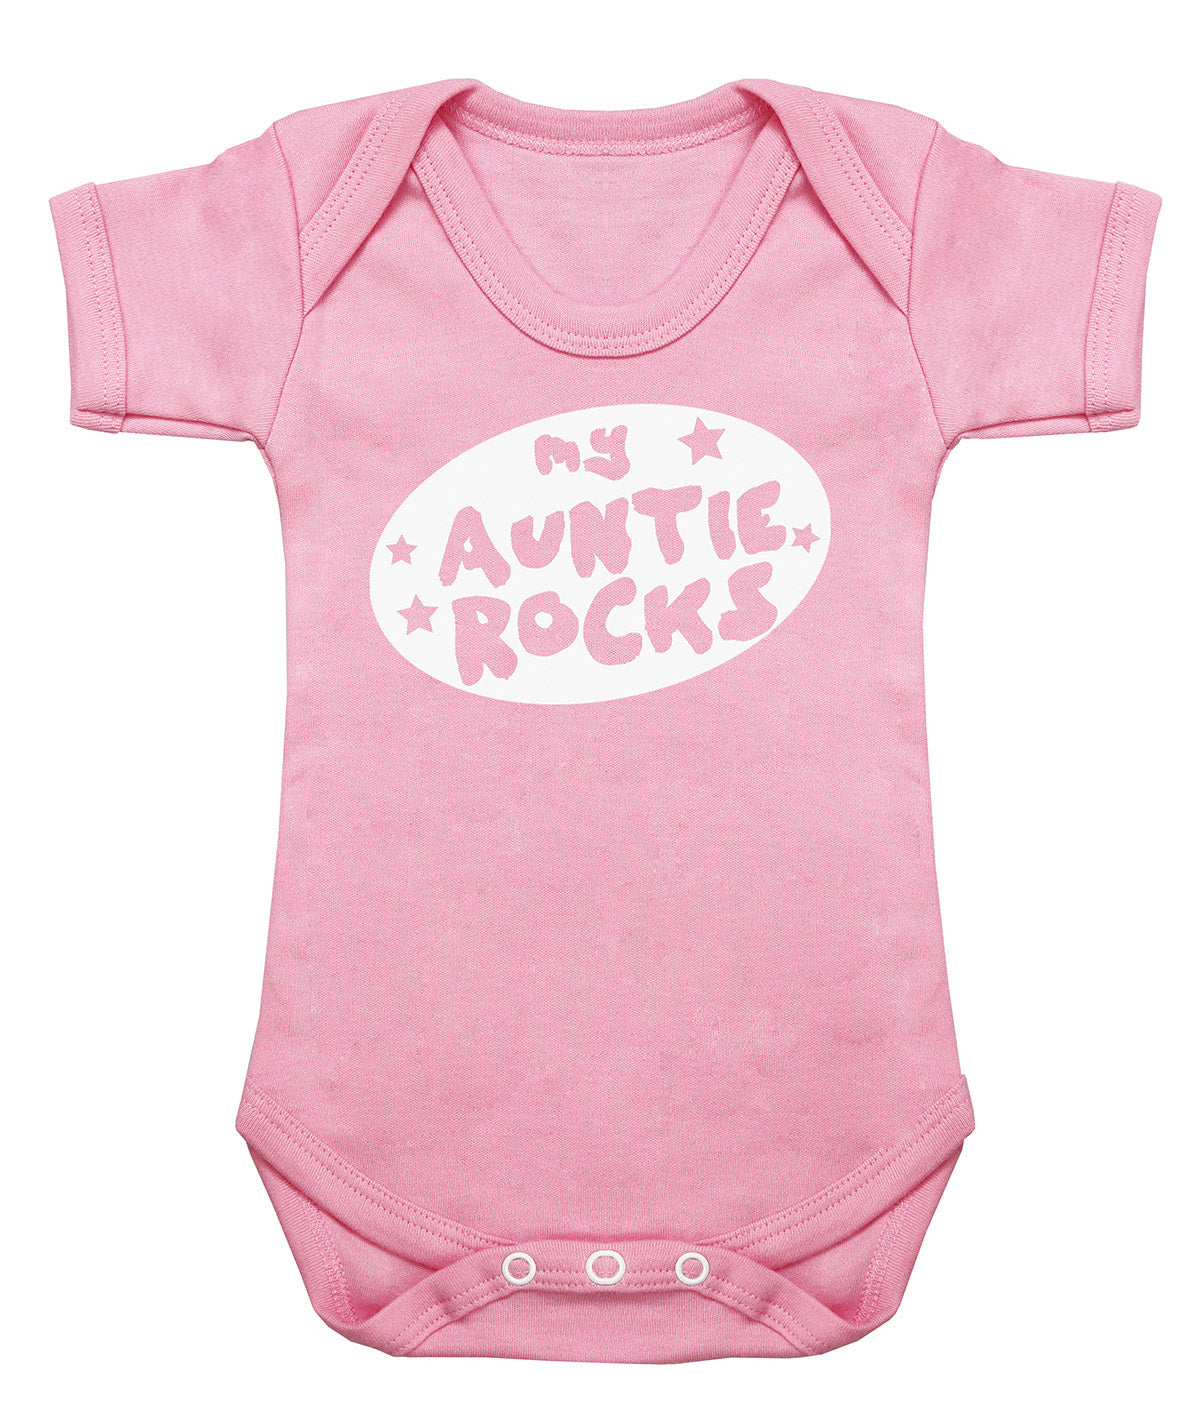 Pick A Family Name - My Mummy, Auntie, Grandad and more Rocks - Baby Bodysuit